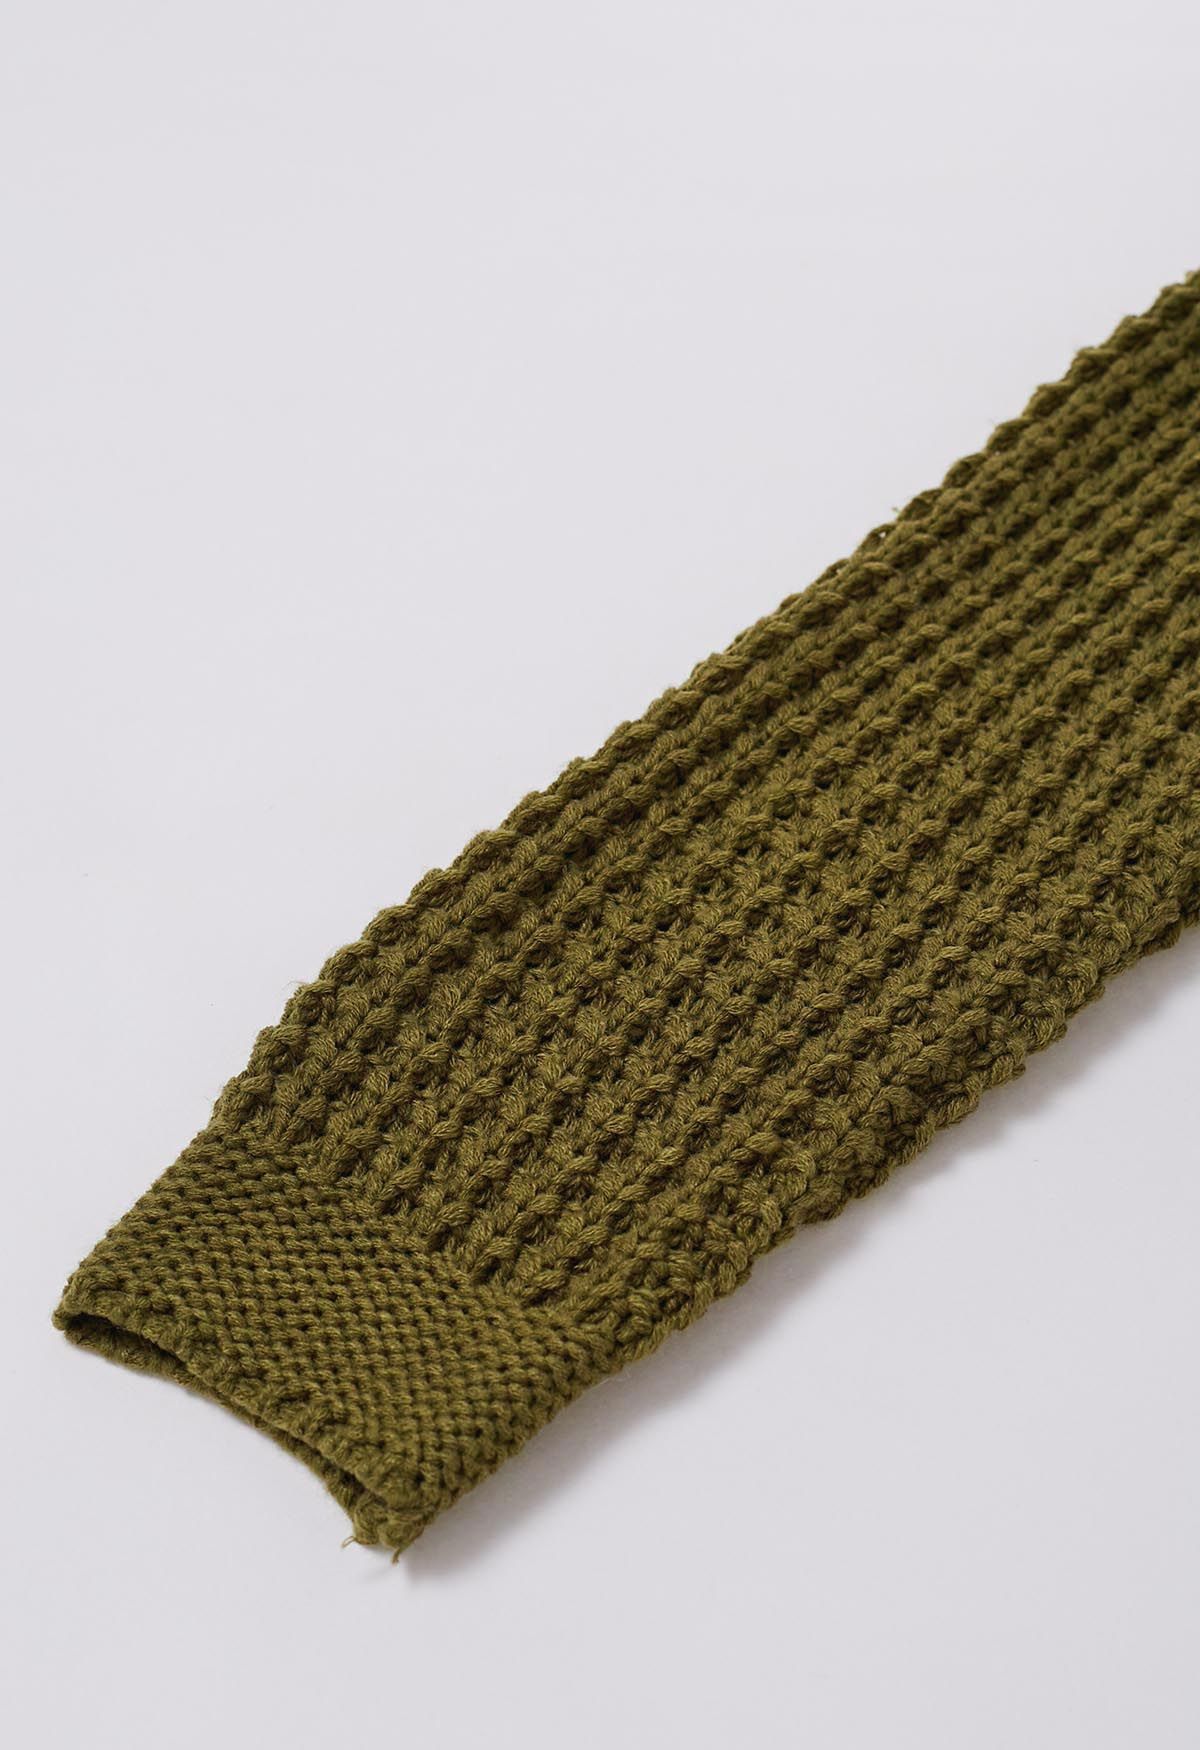 Batwing-Sleeve Pockets Waffle Knit Cardigan in Olive